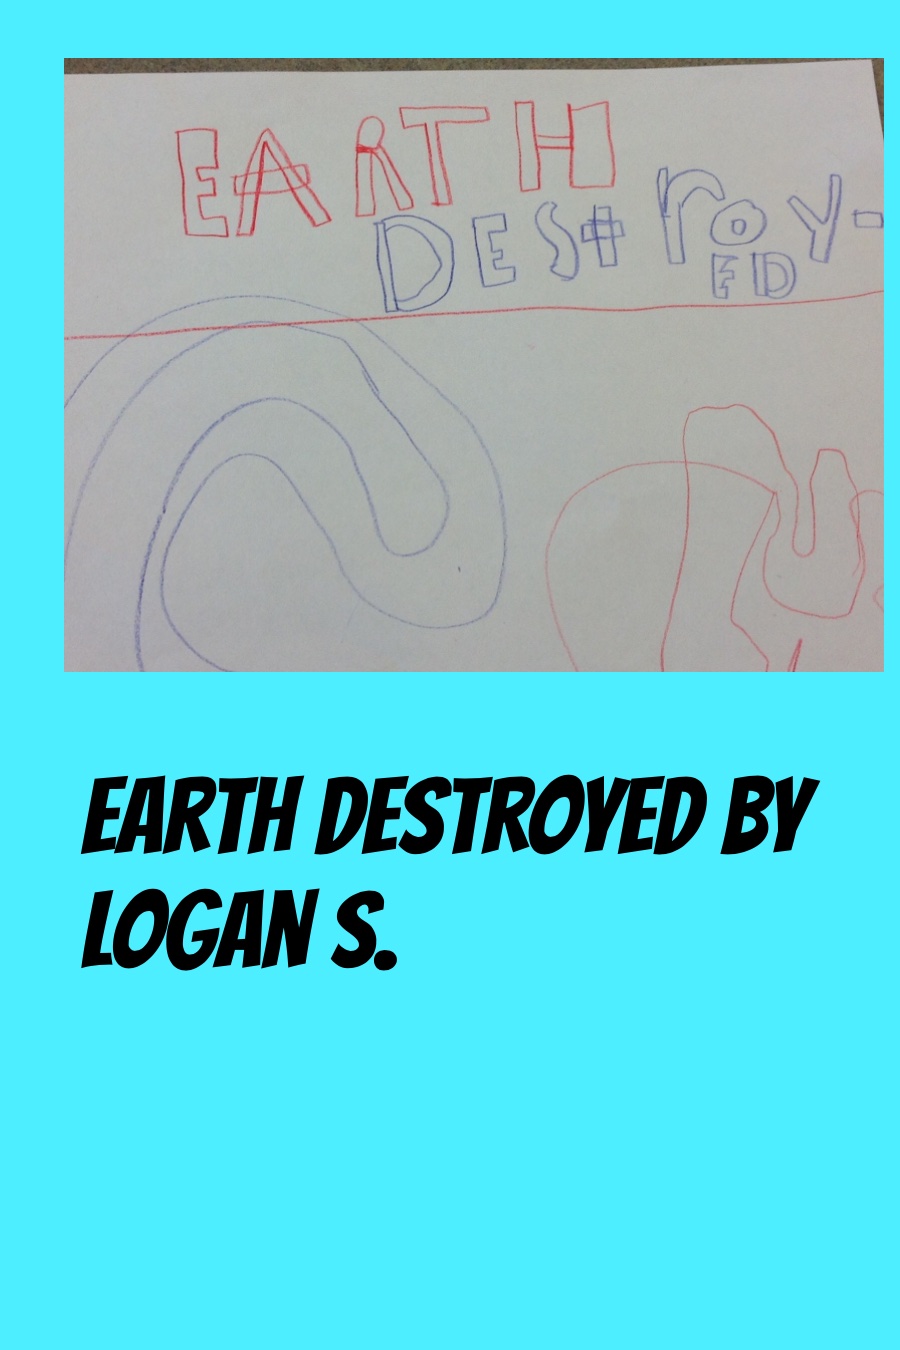 Earth destroyed by Logan S